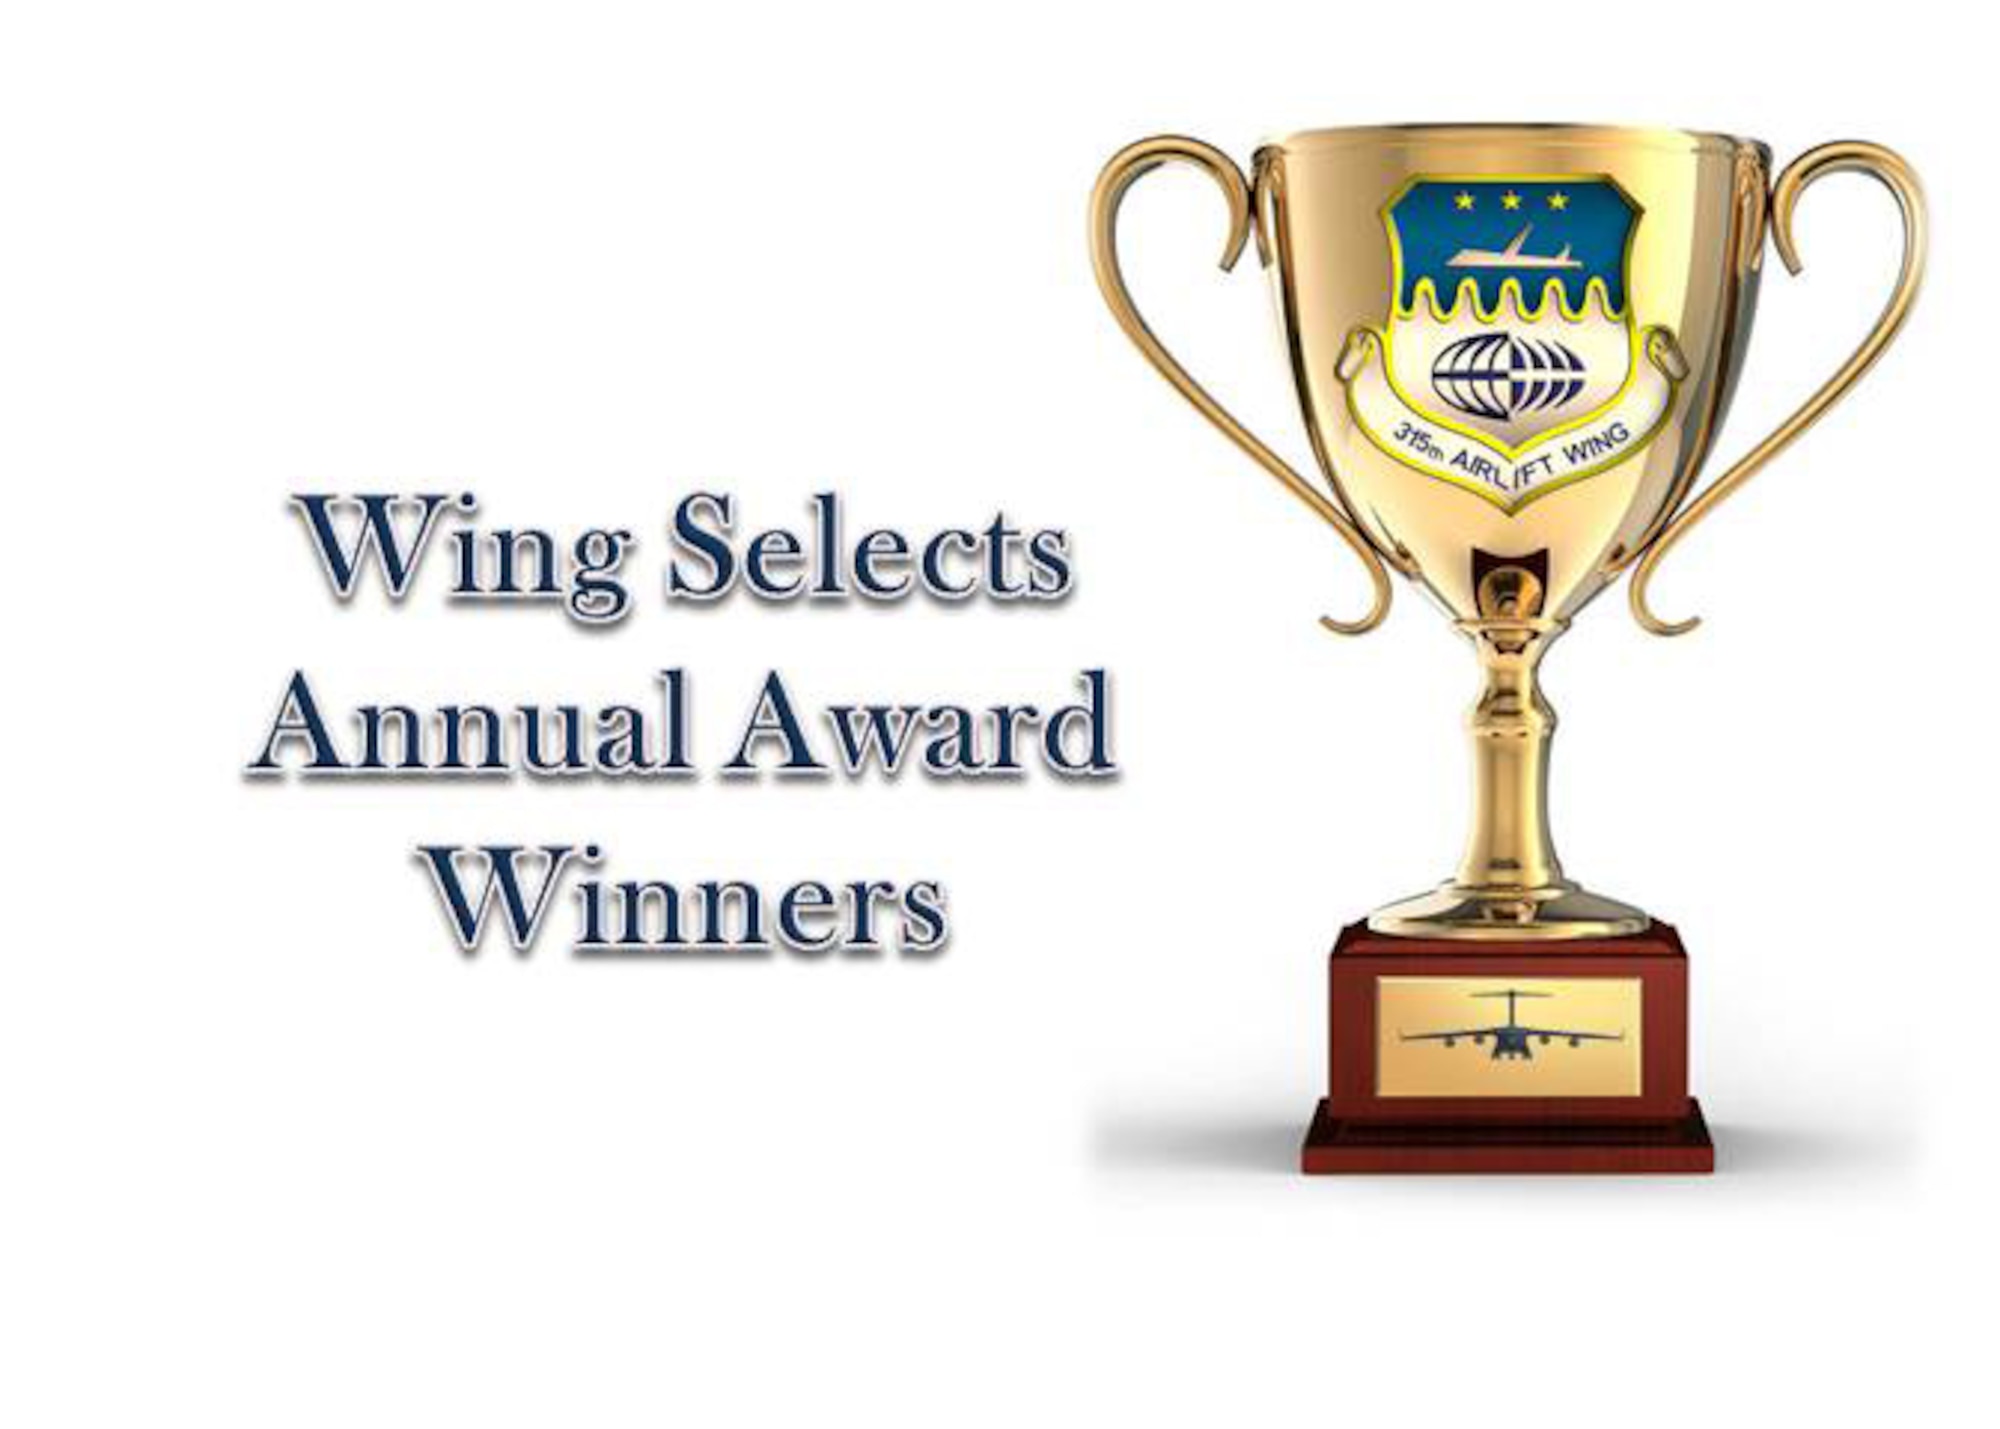 Wing announces annual award winners for 2019